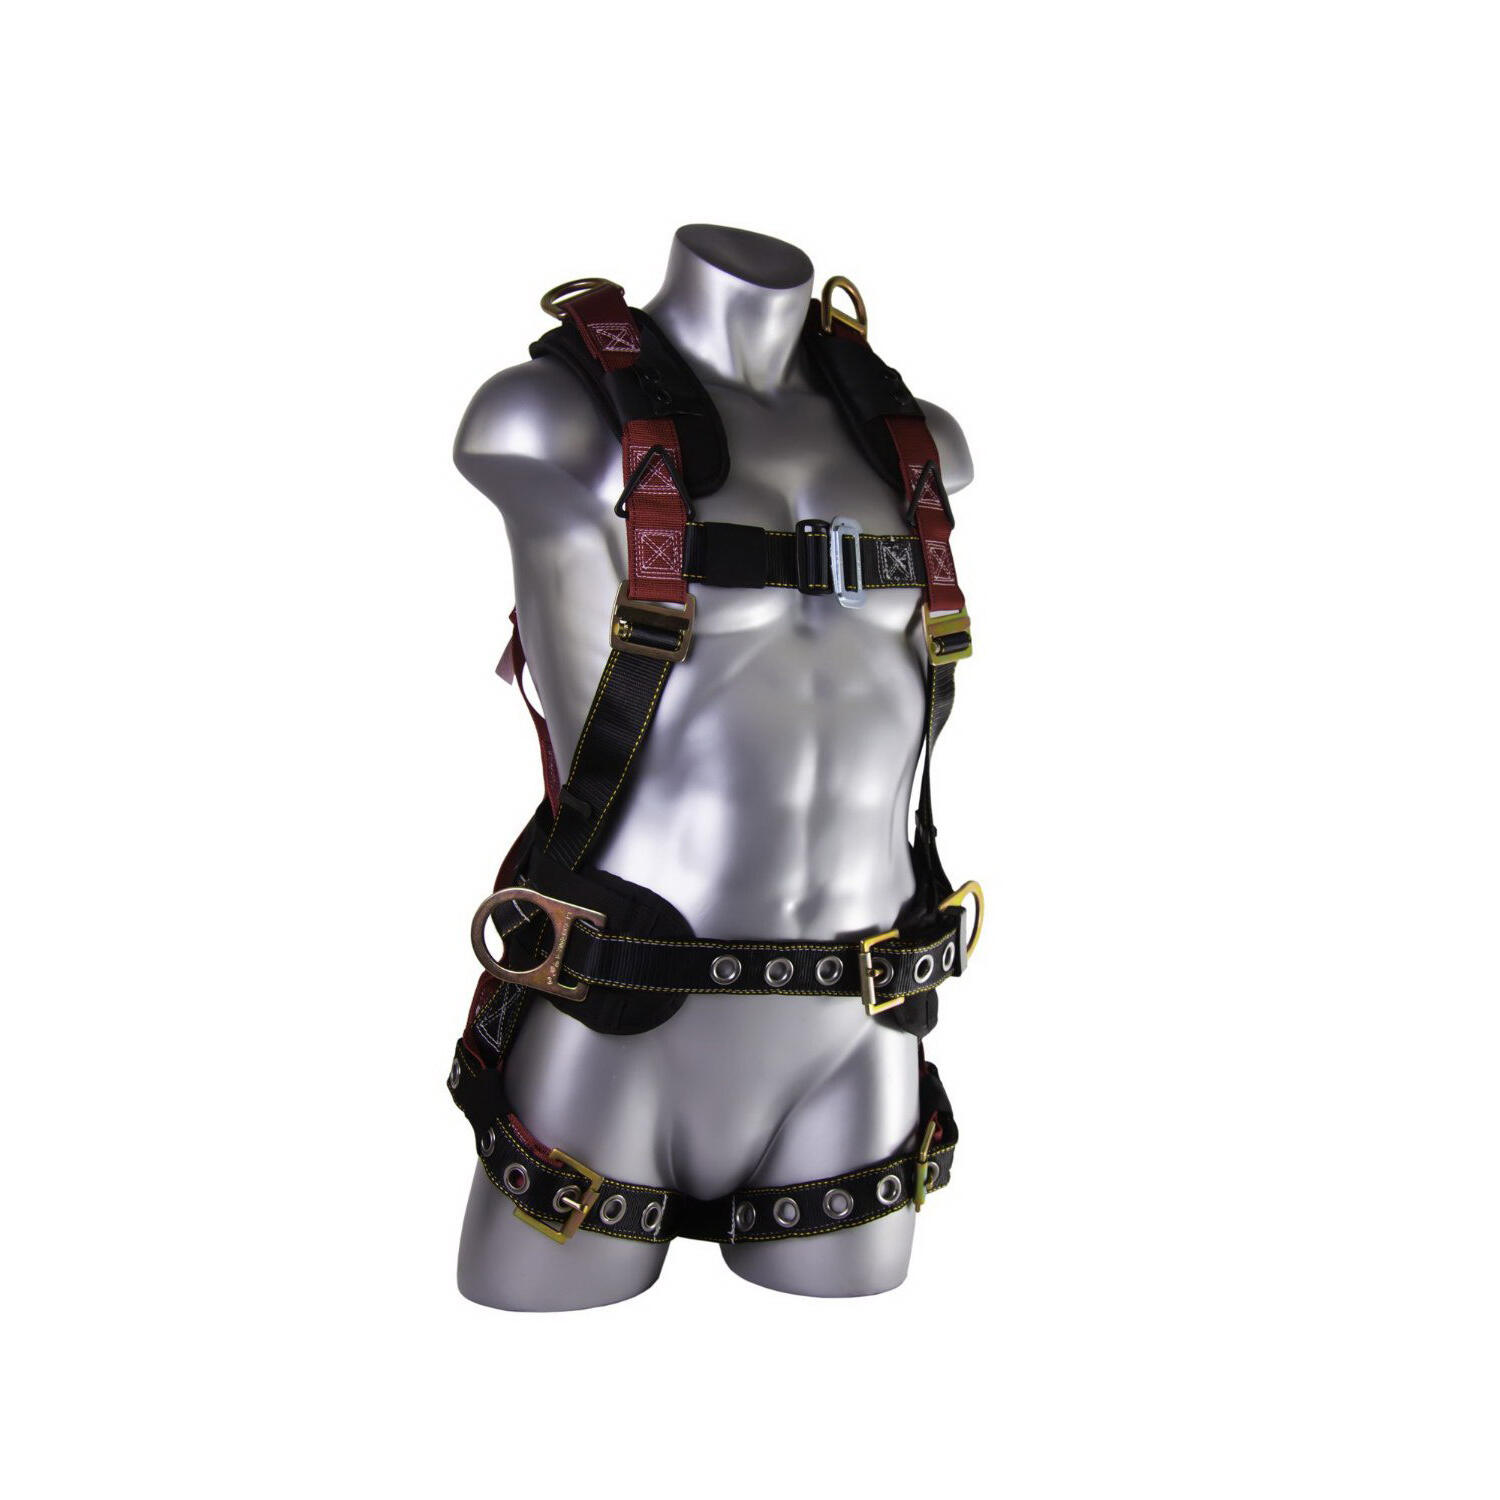 Seraph Full Body Construction Harness, D-Rings, Tongue/Buckle Closures